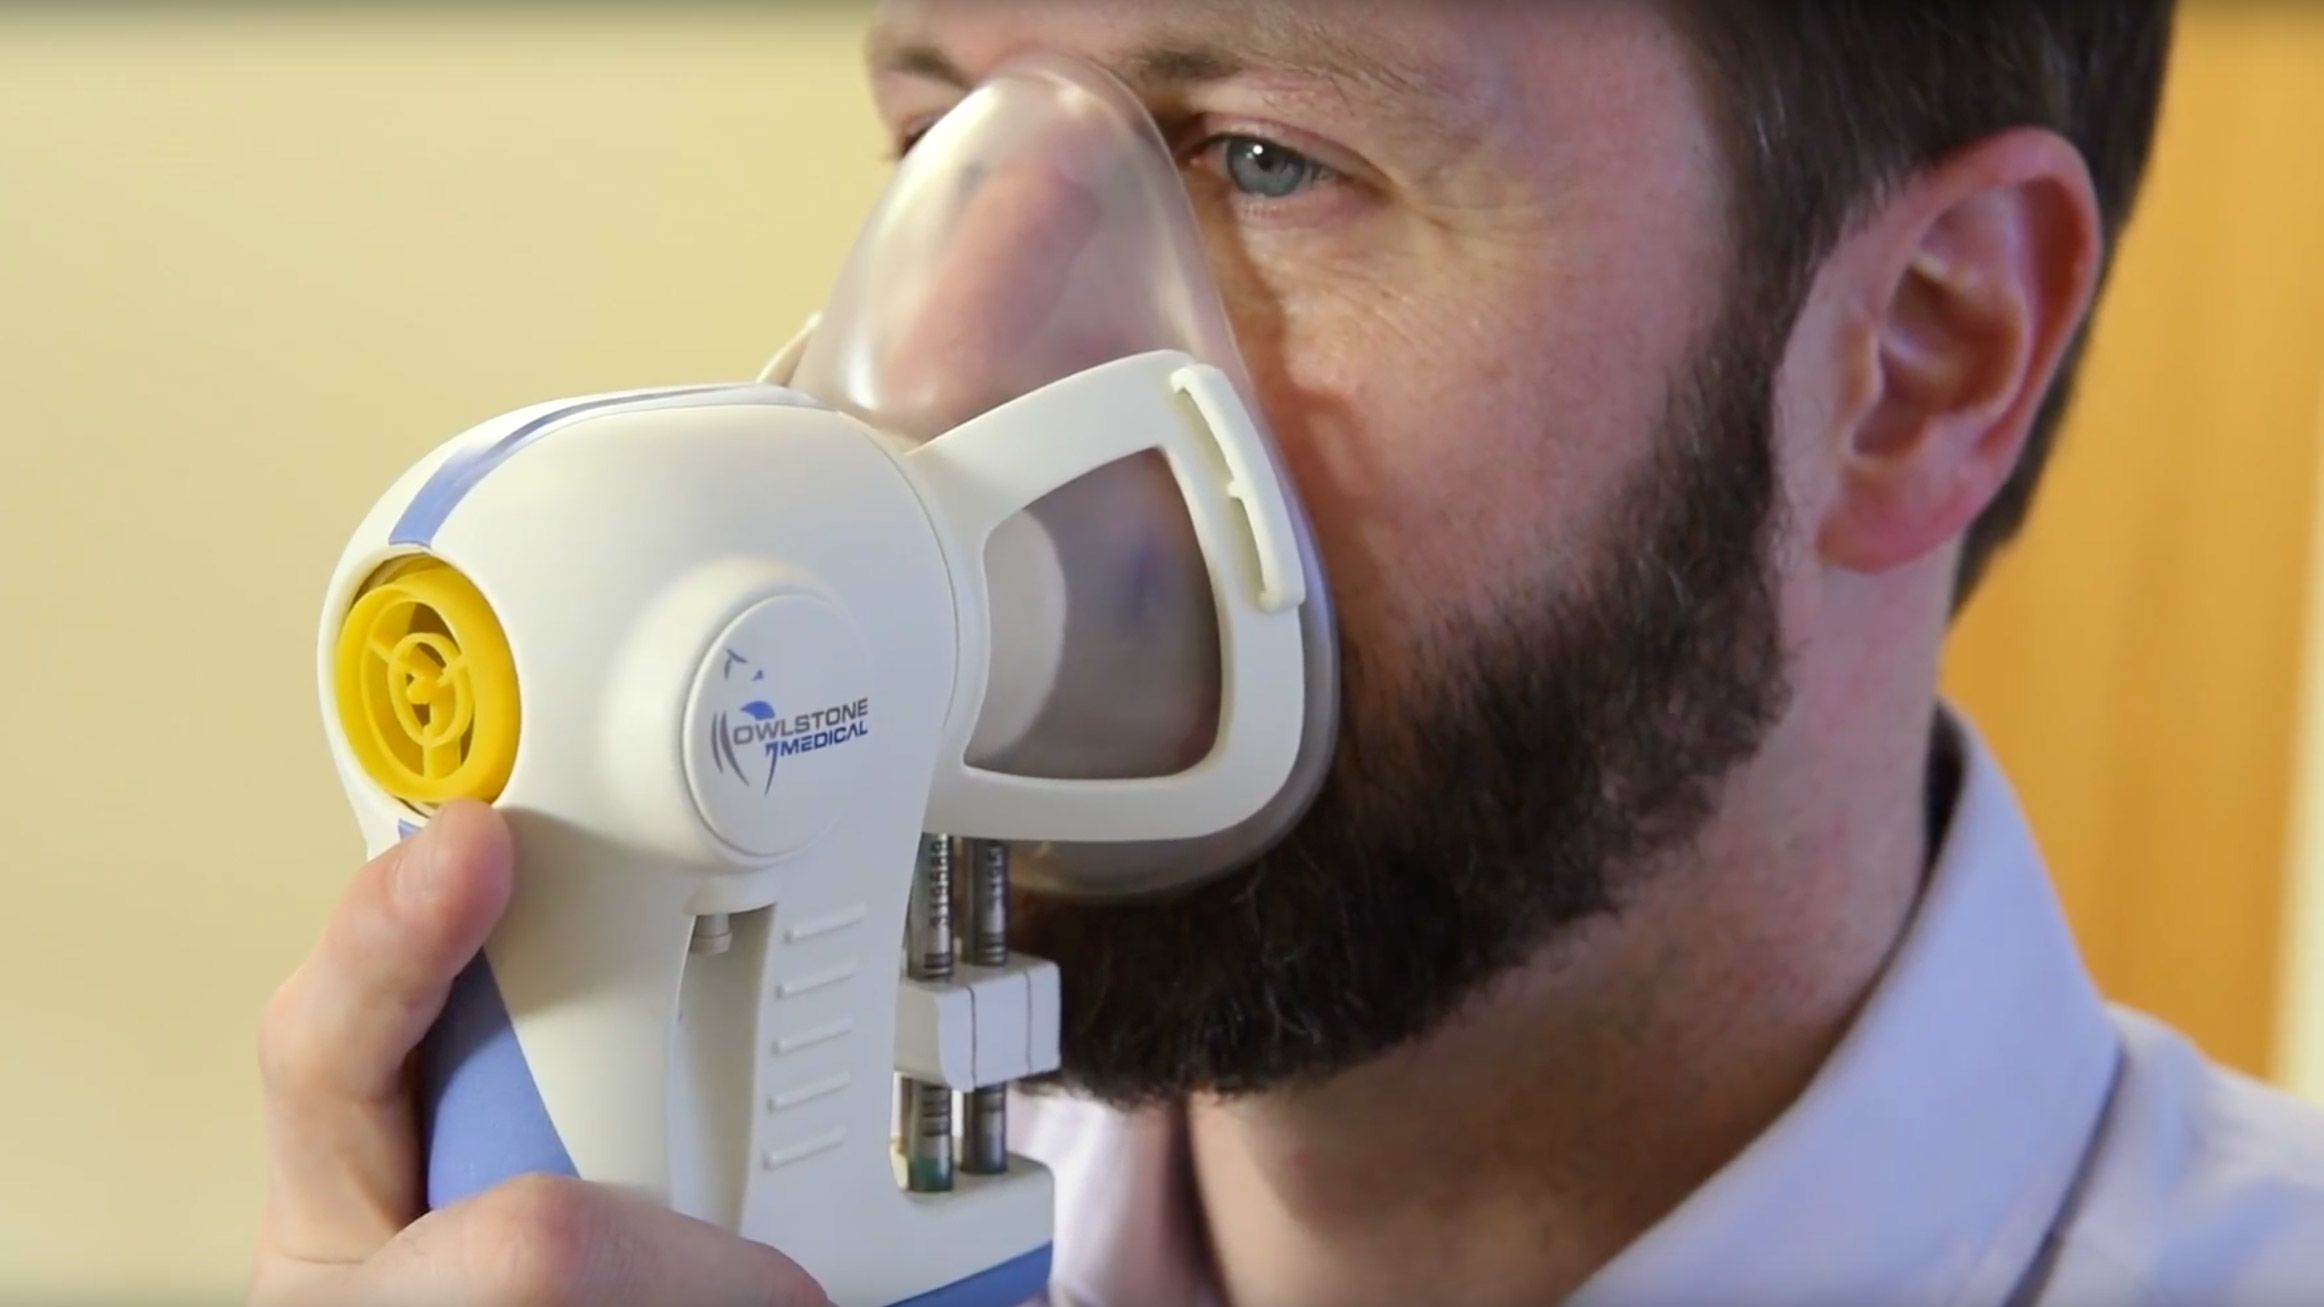 Can You Scientifically Beat a Breathalyzer Test?